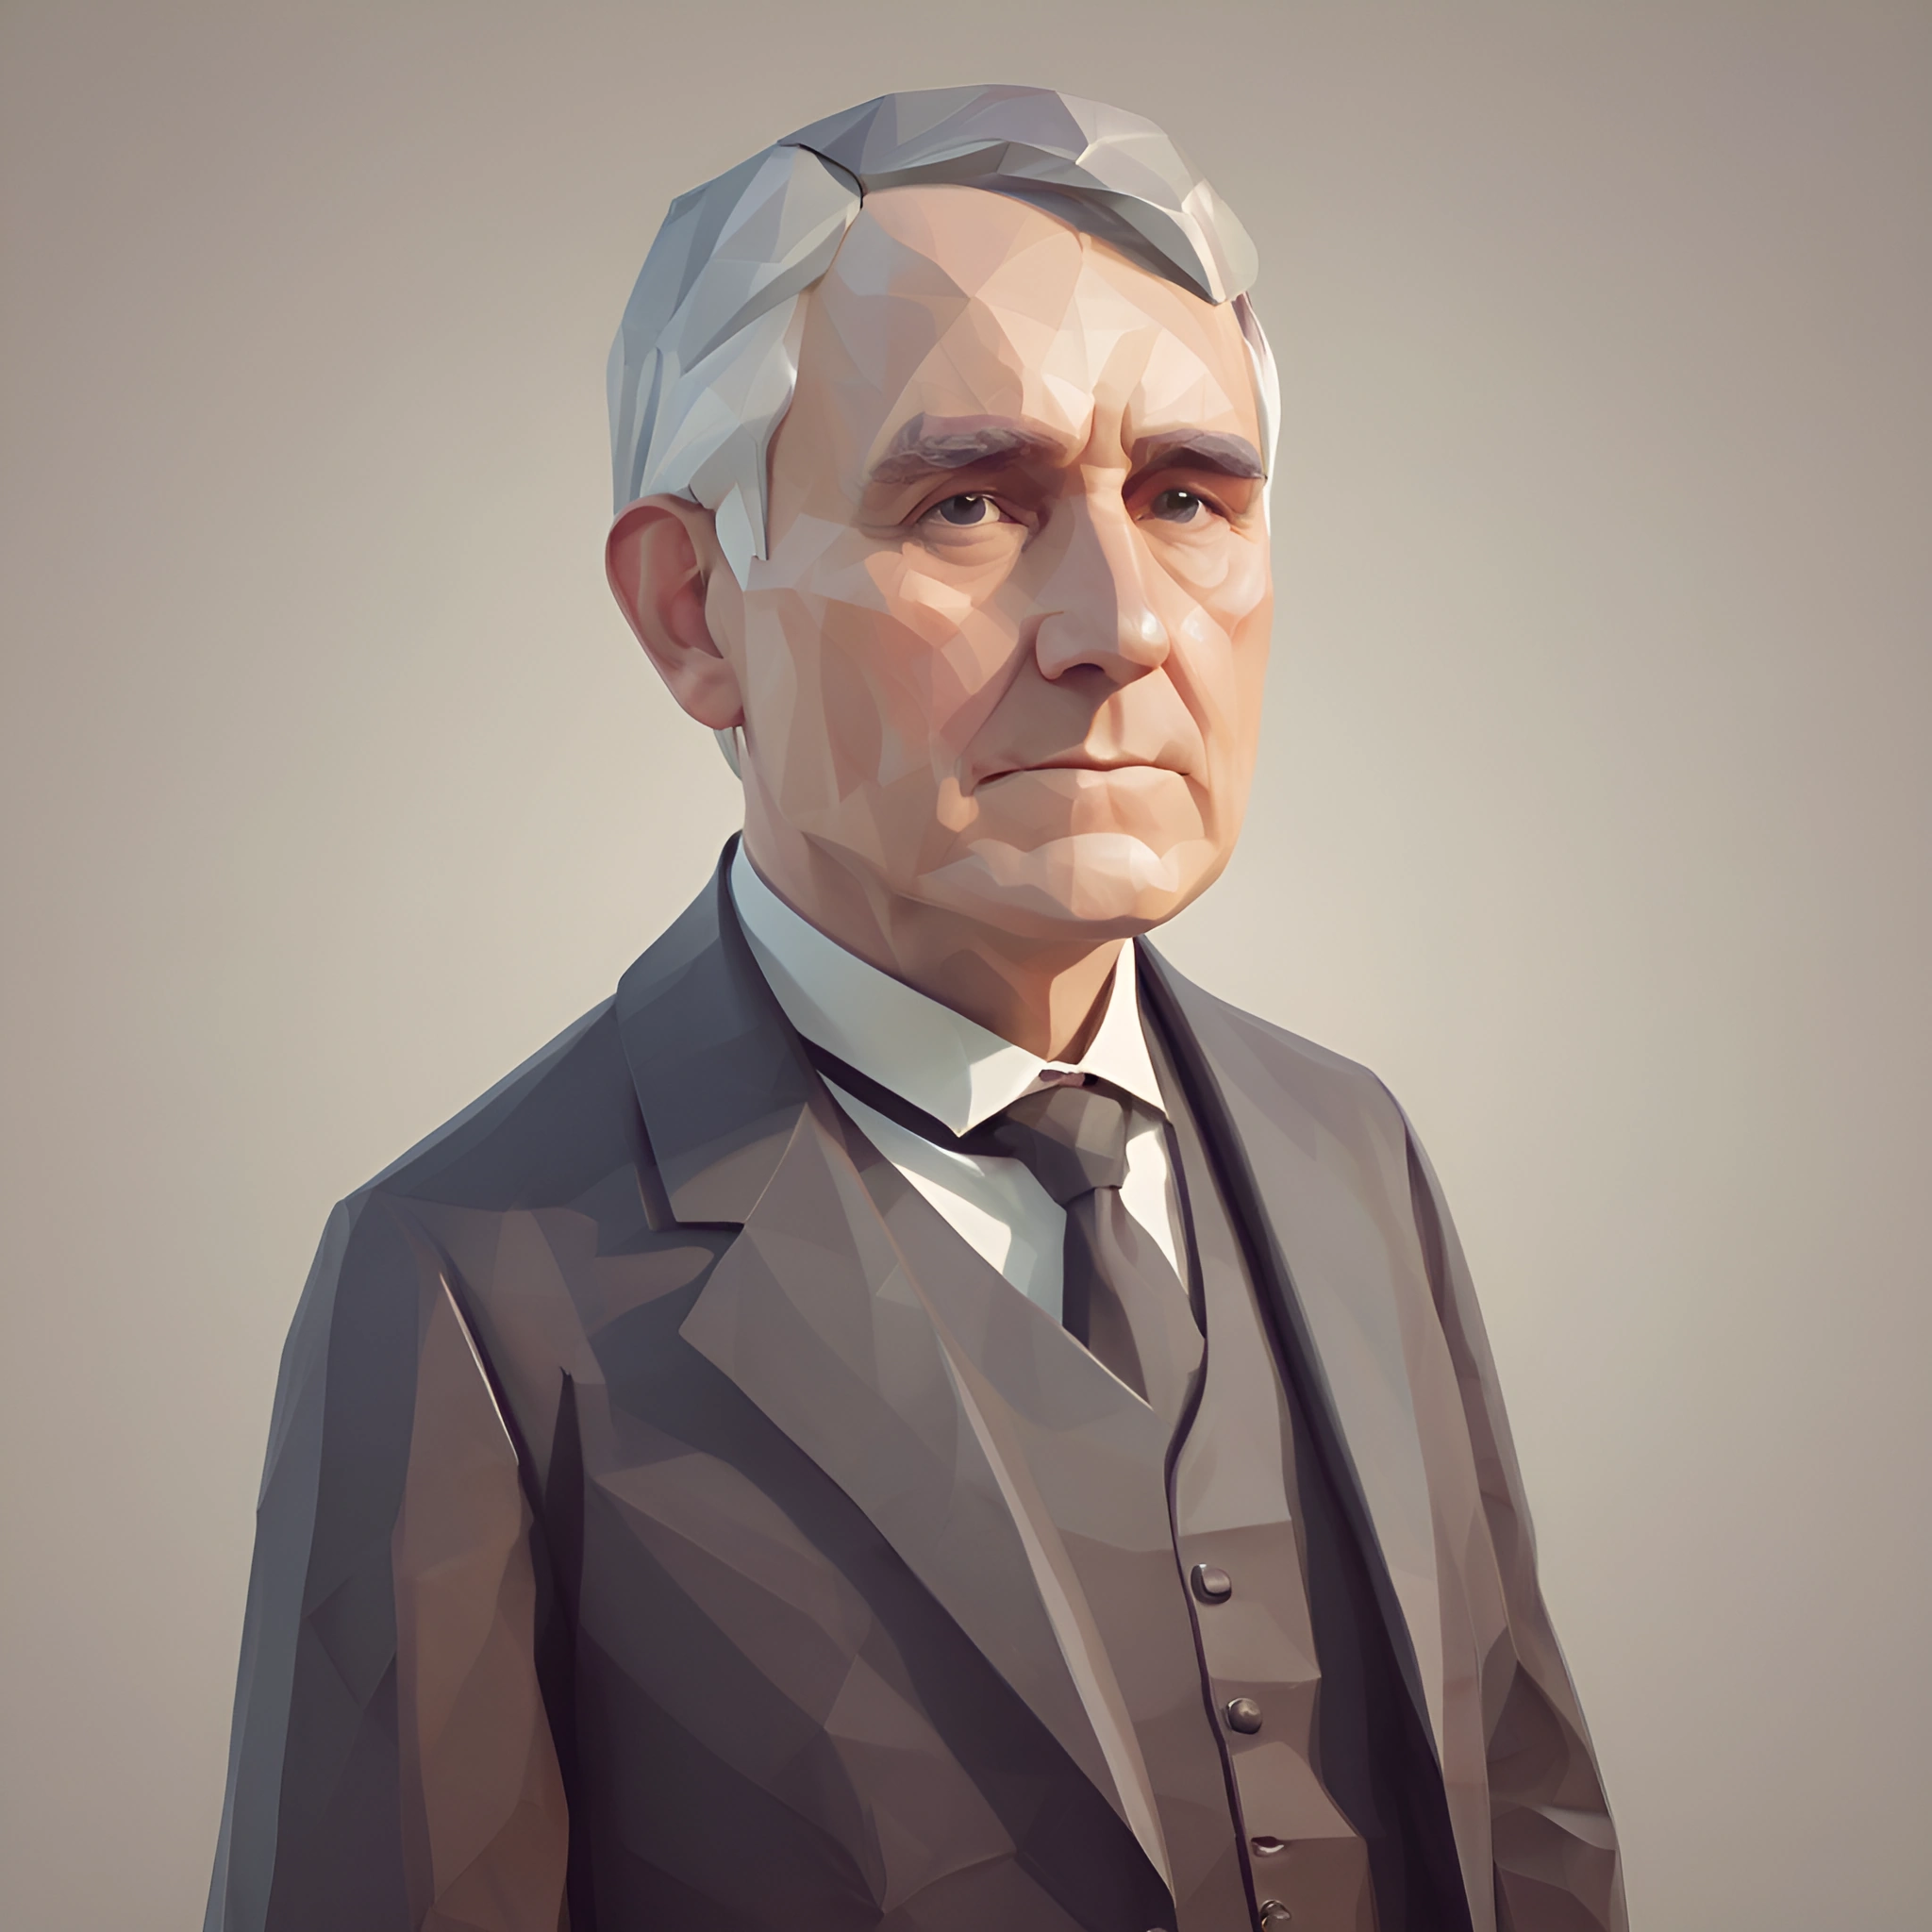 a digital painting of a man in a suit and tie